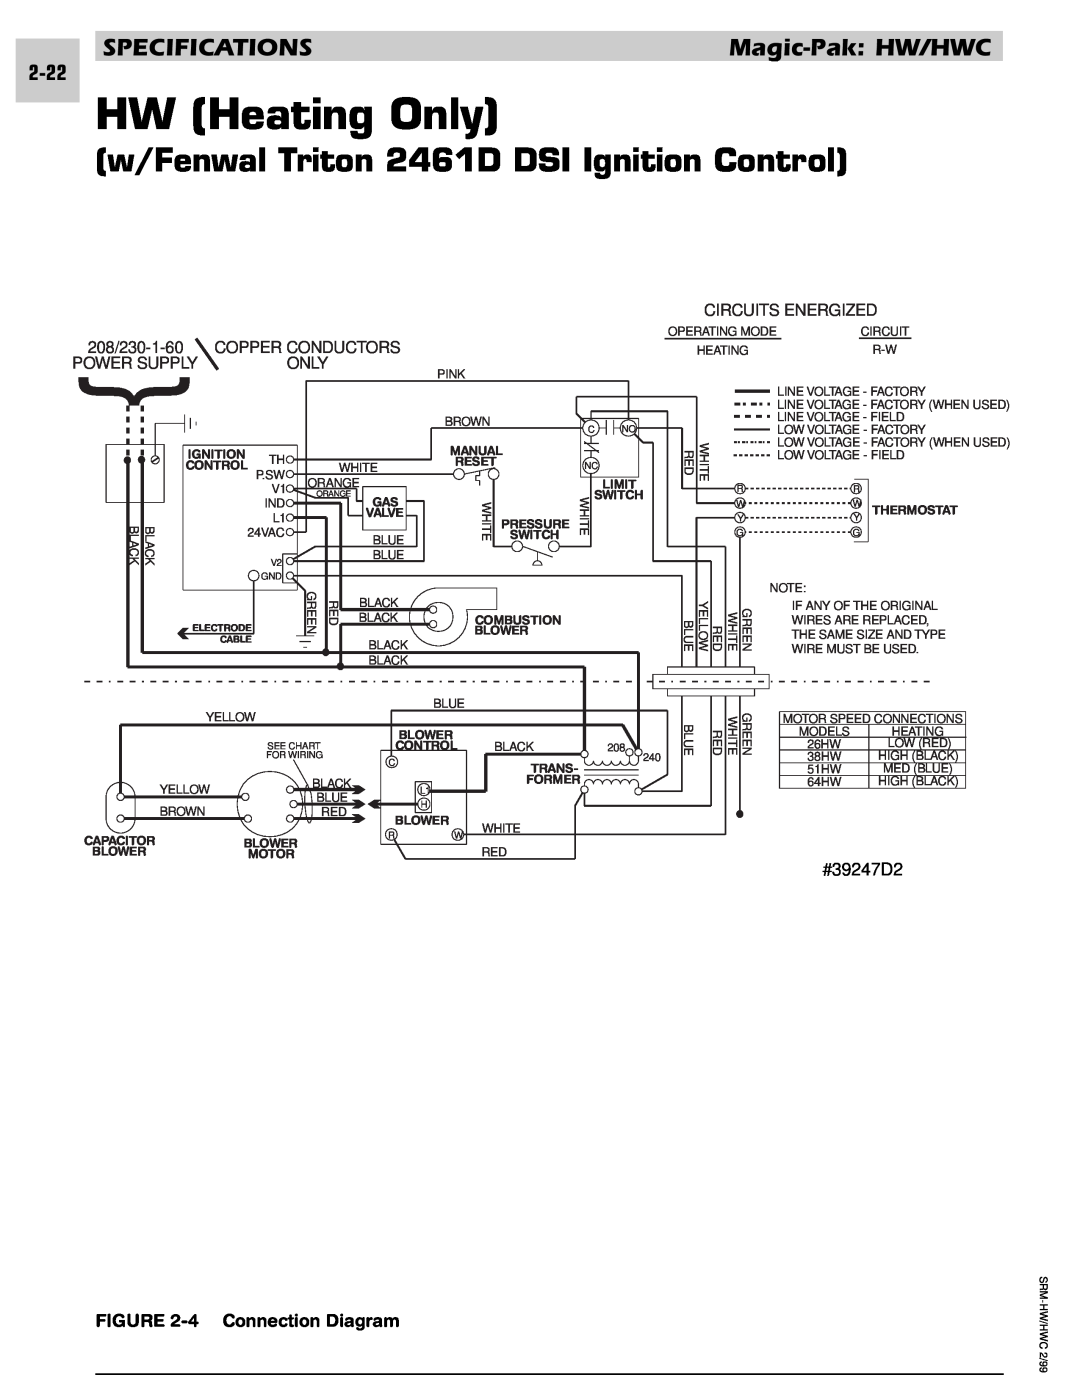 Armstrong World Industries 243 HW Heating Only, w/Fenwal Triton 2461D DSI Ignition Control, #39247D2, 4 Connection Diagram 